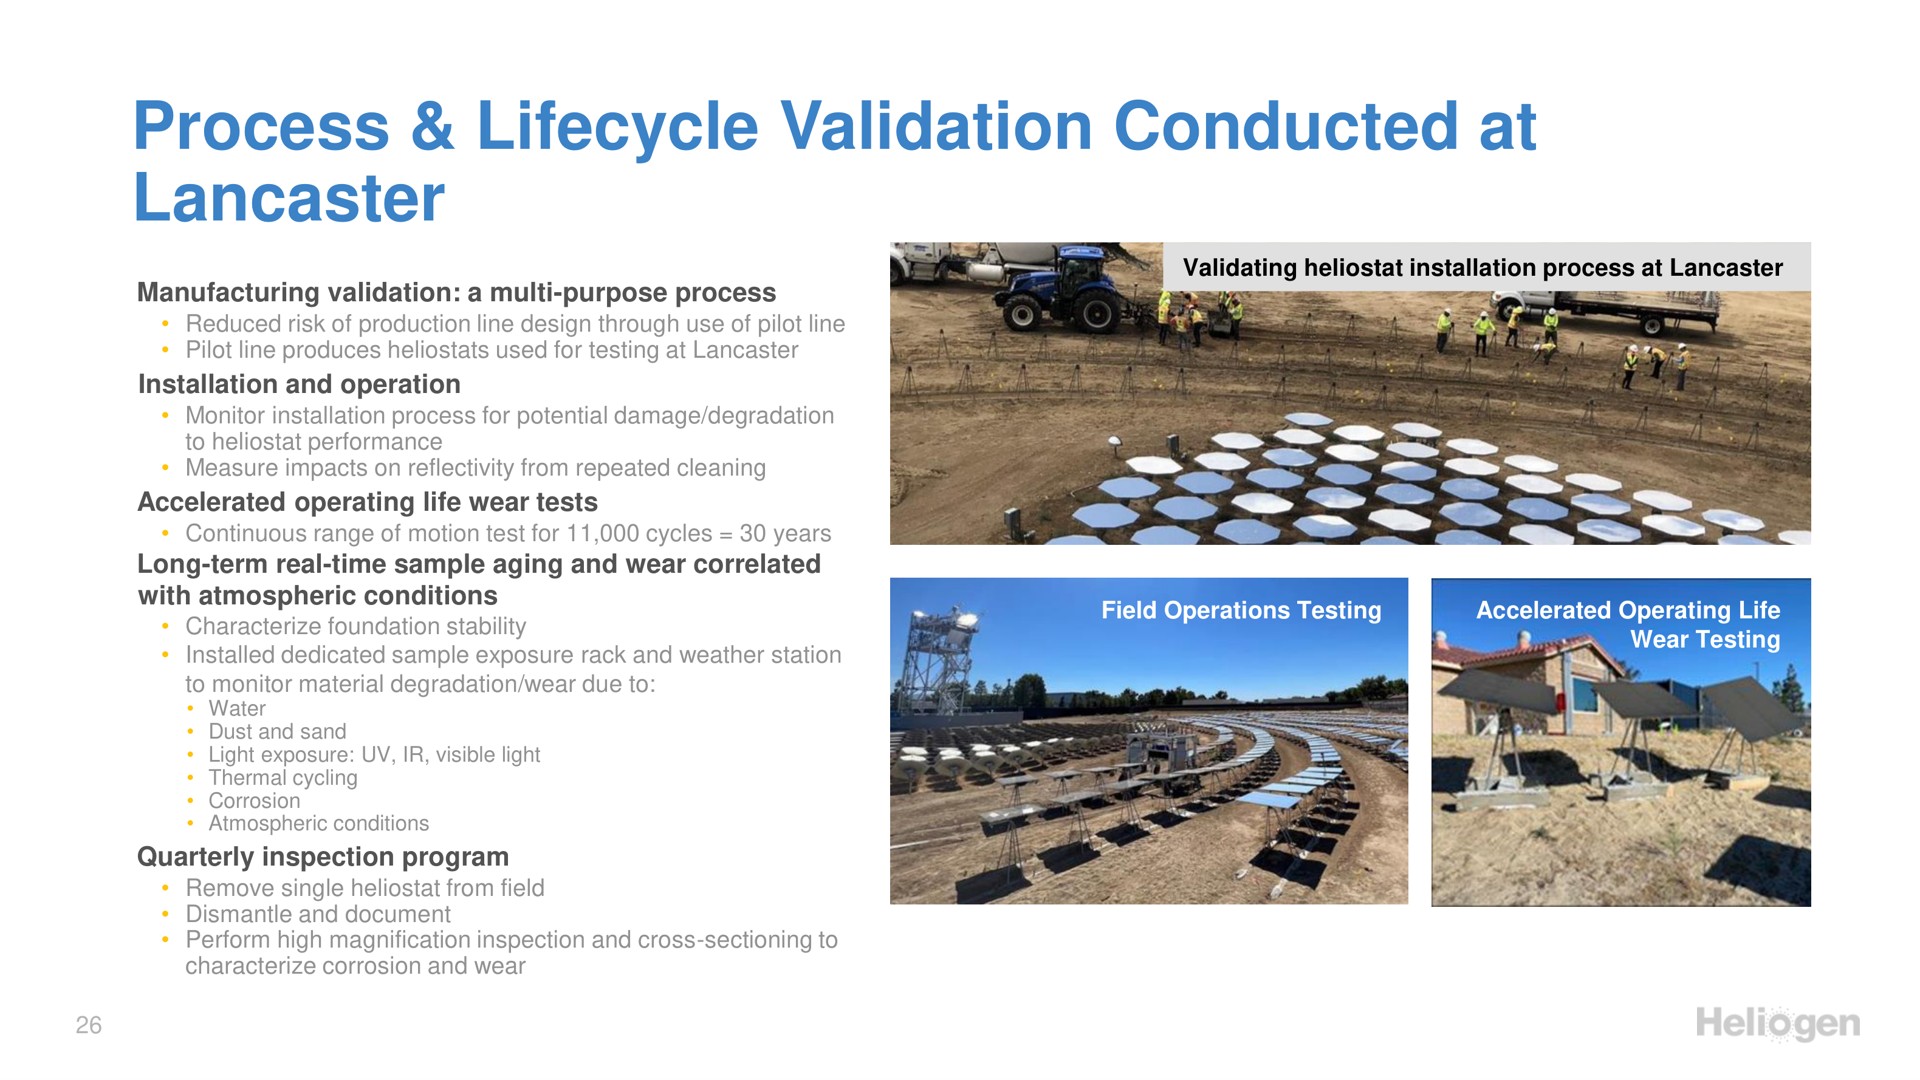 process validation conducted at | Heliogen